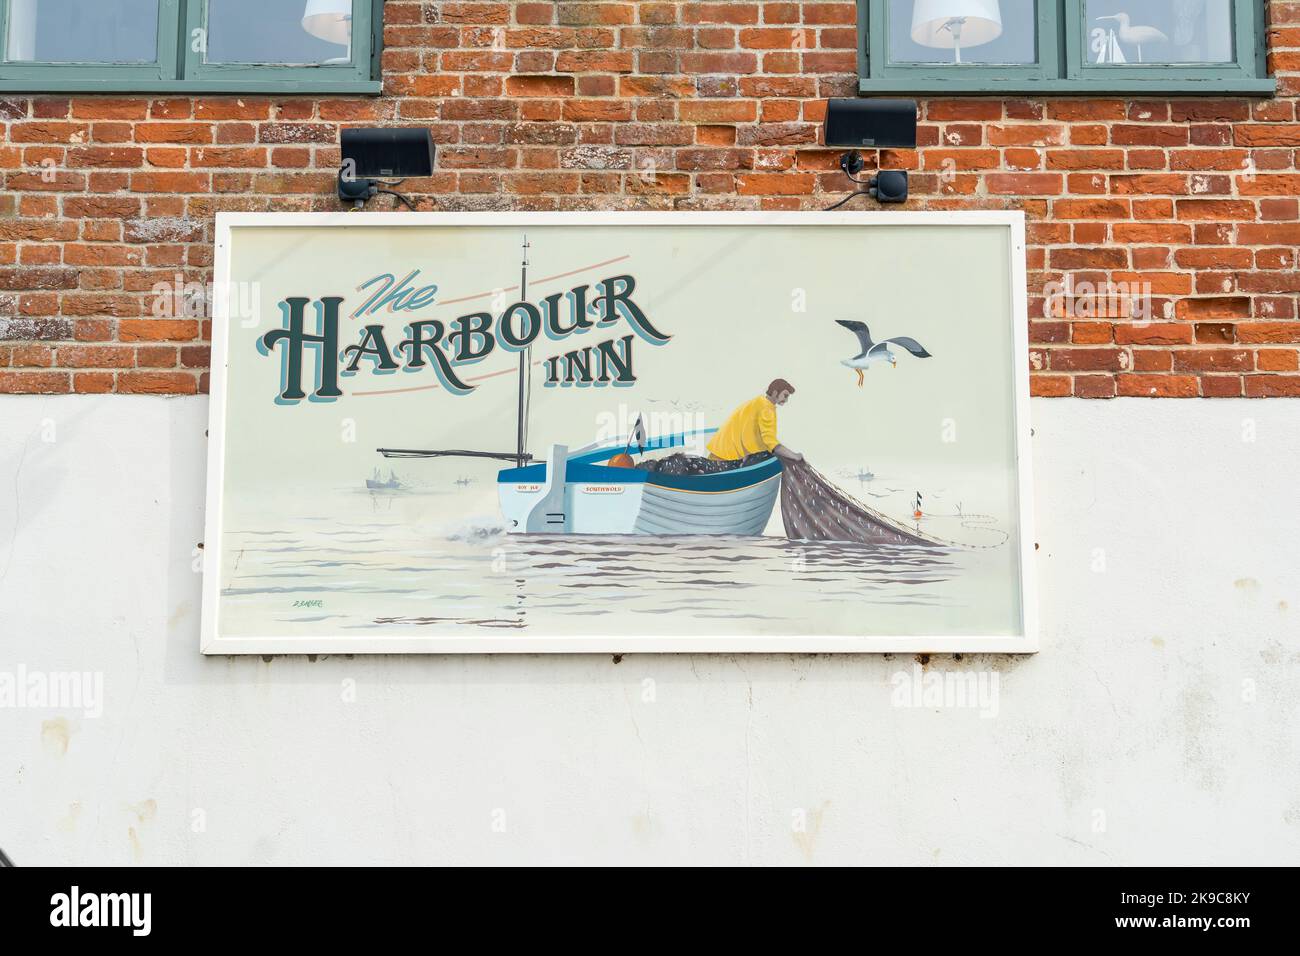 The Harbour Inn sign showing fisherman at sea in boat hauling net, Southwold harbour suffolk 2022 Stock Photo